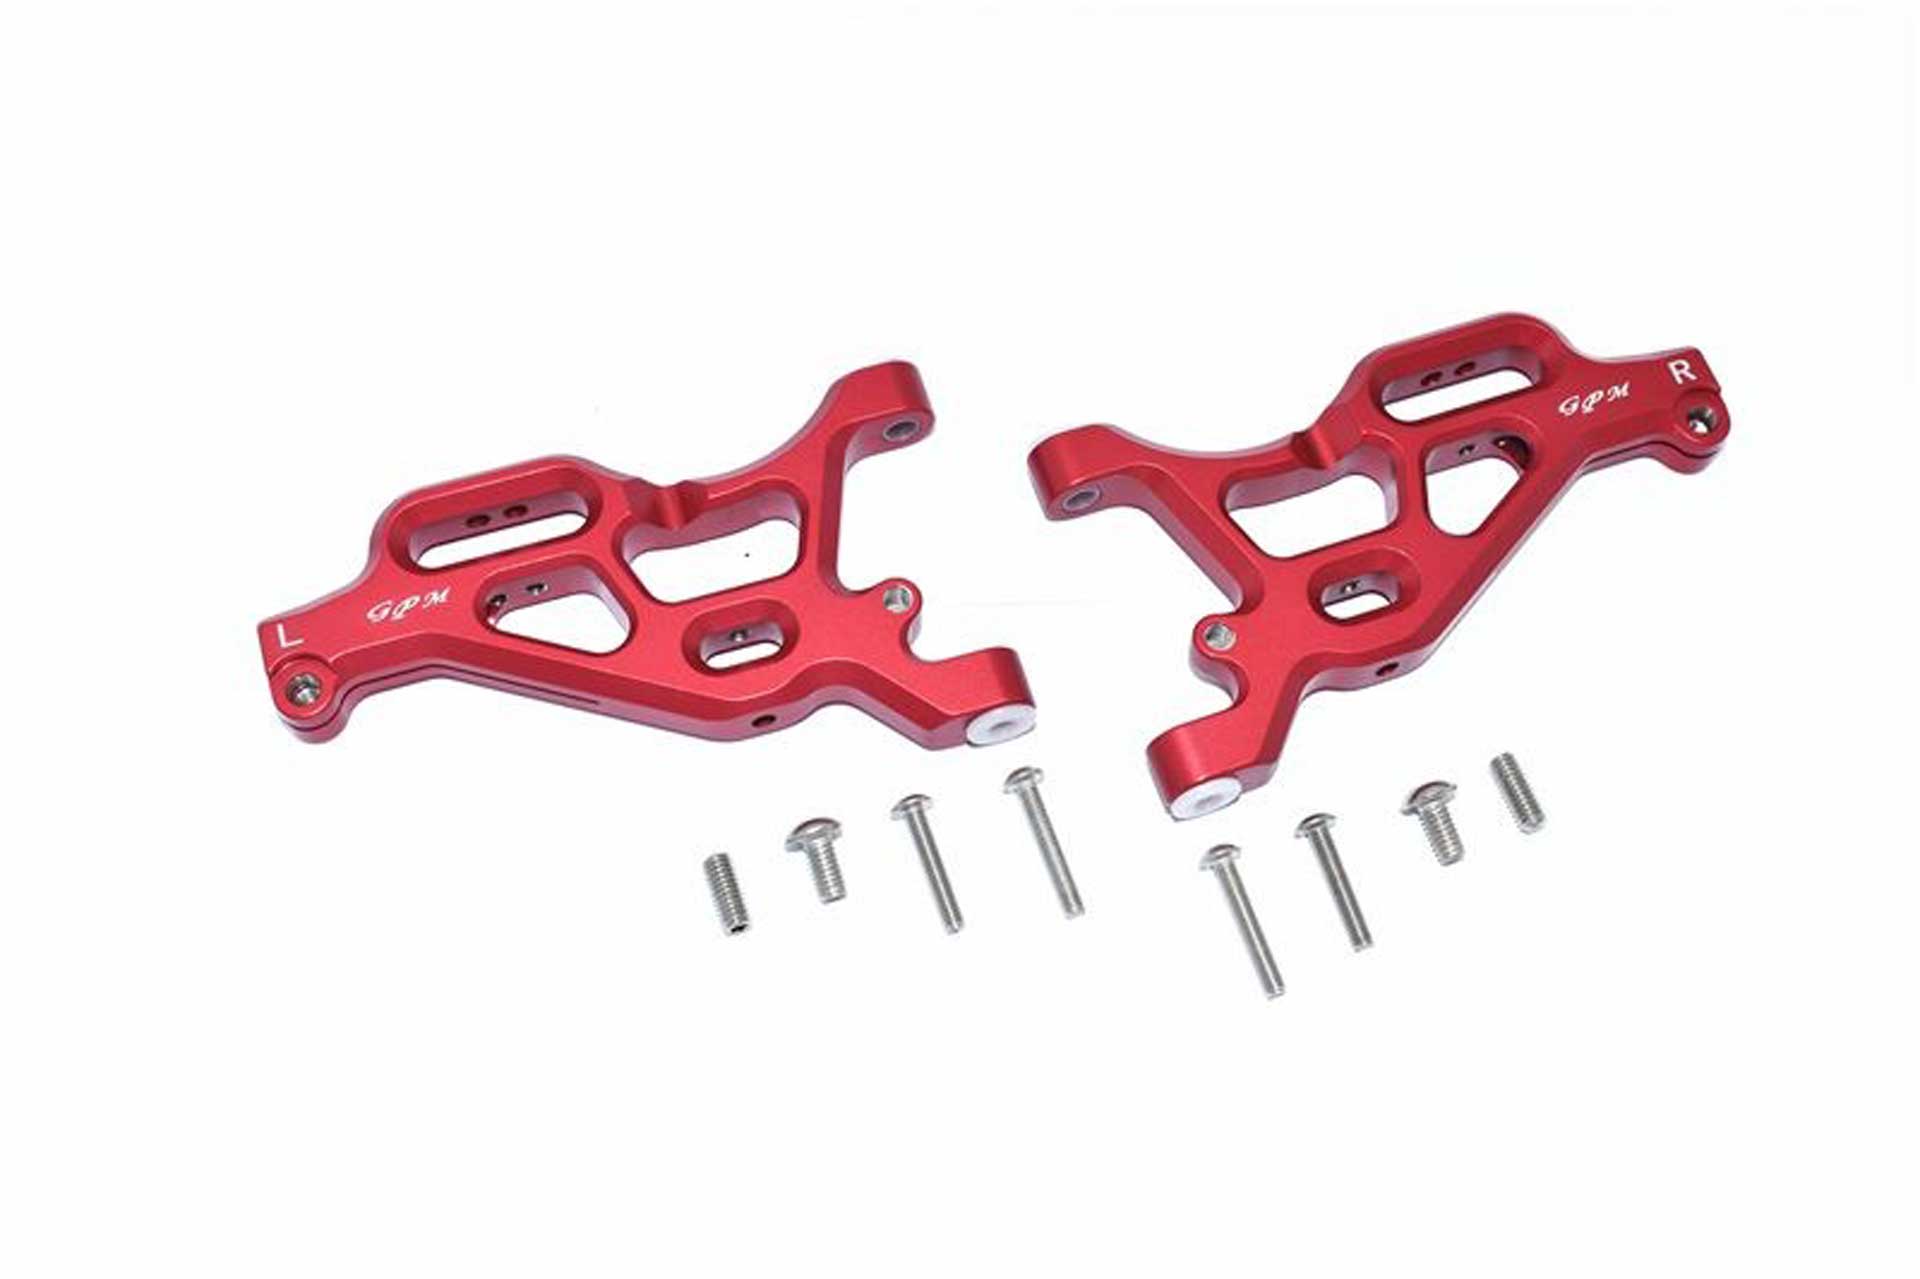 GPM ALUMINUM FRONT LOWER ARMS -10PC SET red GPM ARRMA LIMITLESS INFRACTION TYPHON